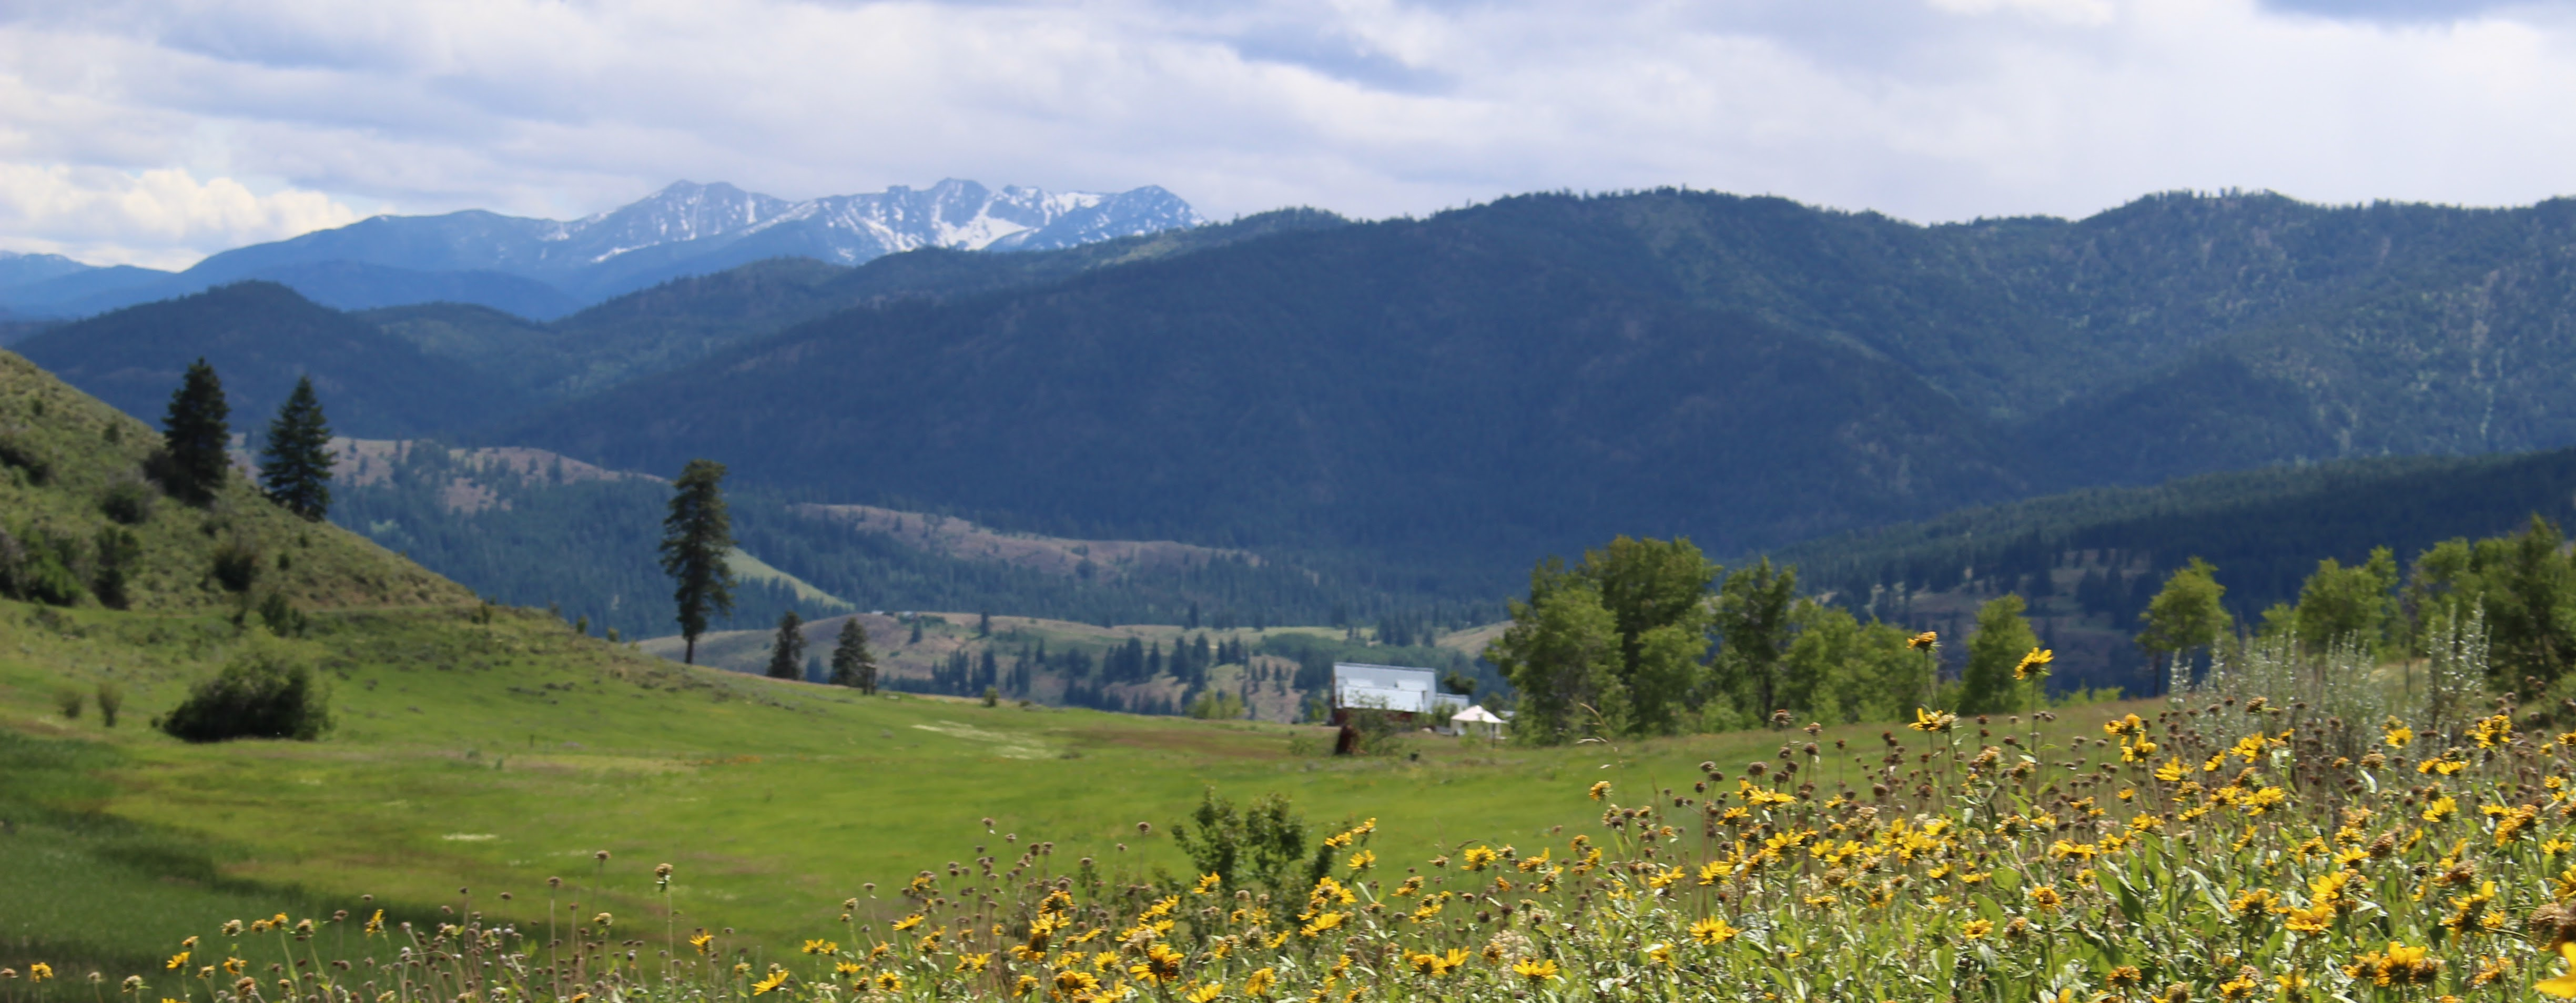 Landscape shot of a field of sunflowers, a cabin, and the North Cascades in the background